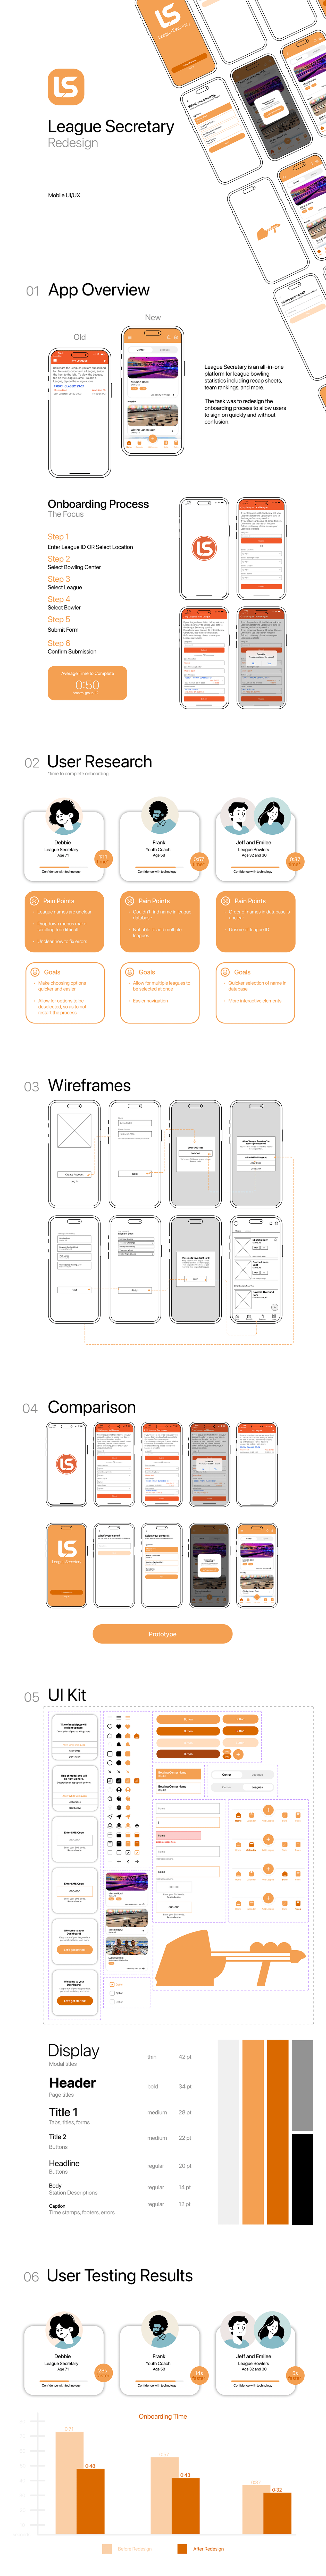 app redesign UI/UX Onboarding Figma component design wireframe prototype user interface Mobile app Case Study